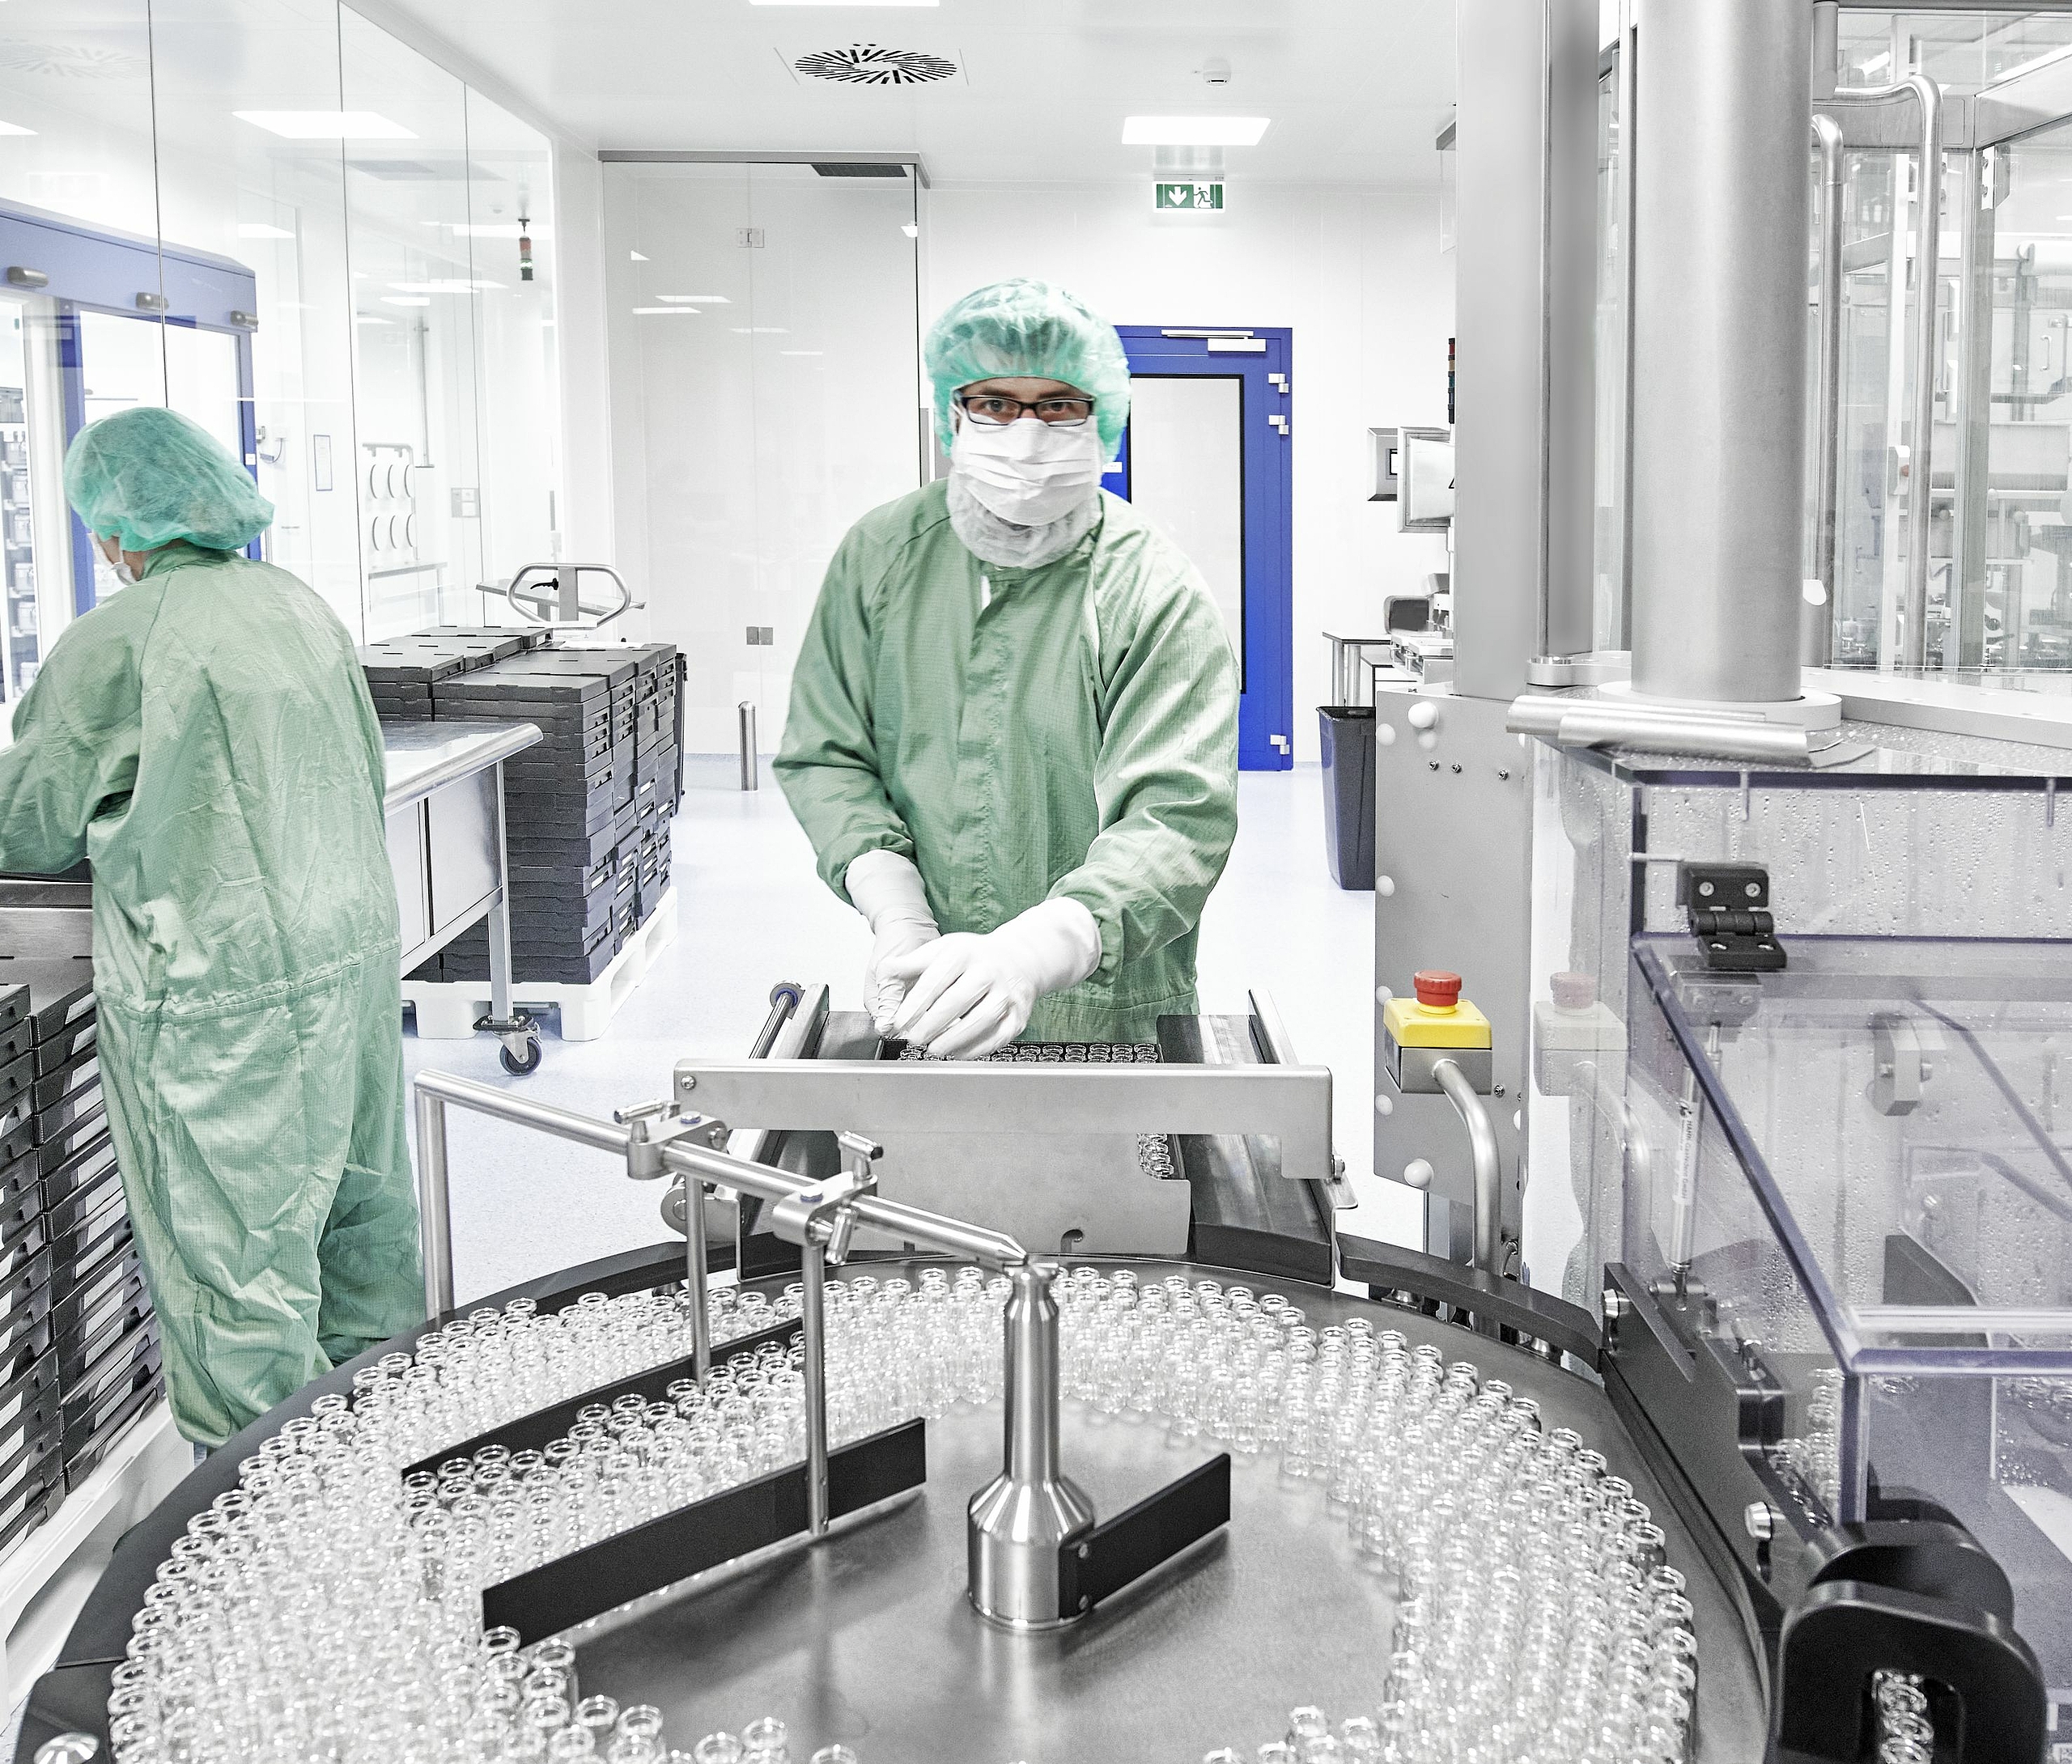 High quality standards in aseptic production at Vetter’s clinical site in Vorarlberg, Austria